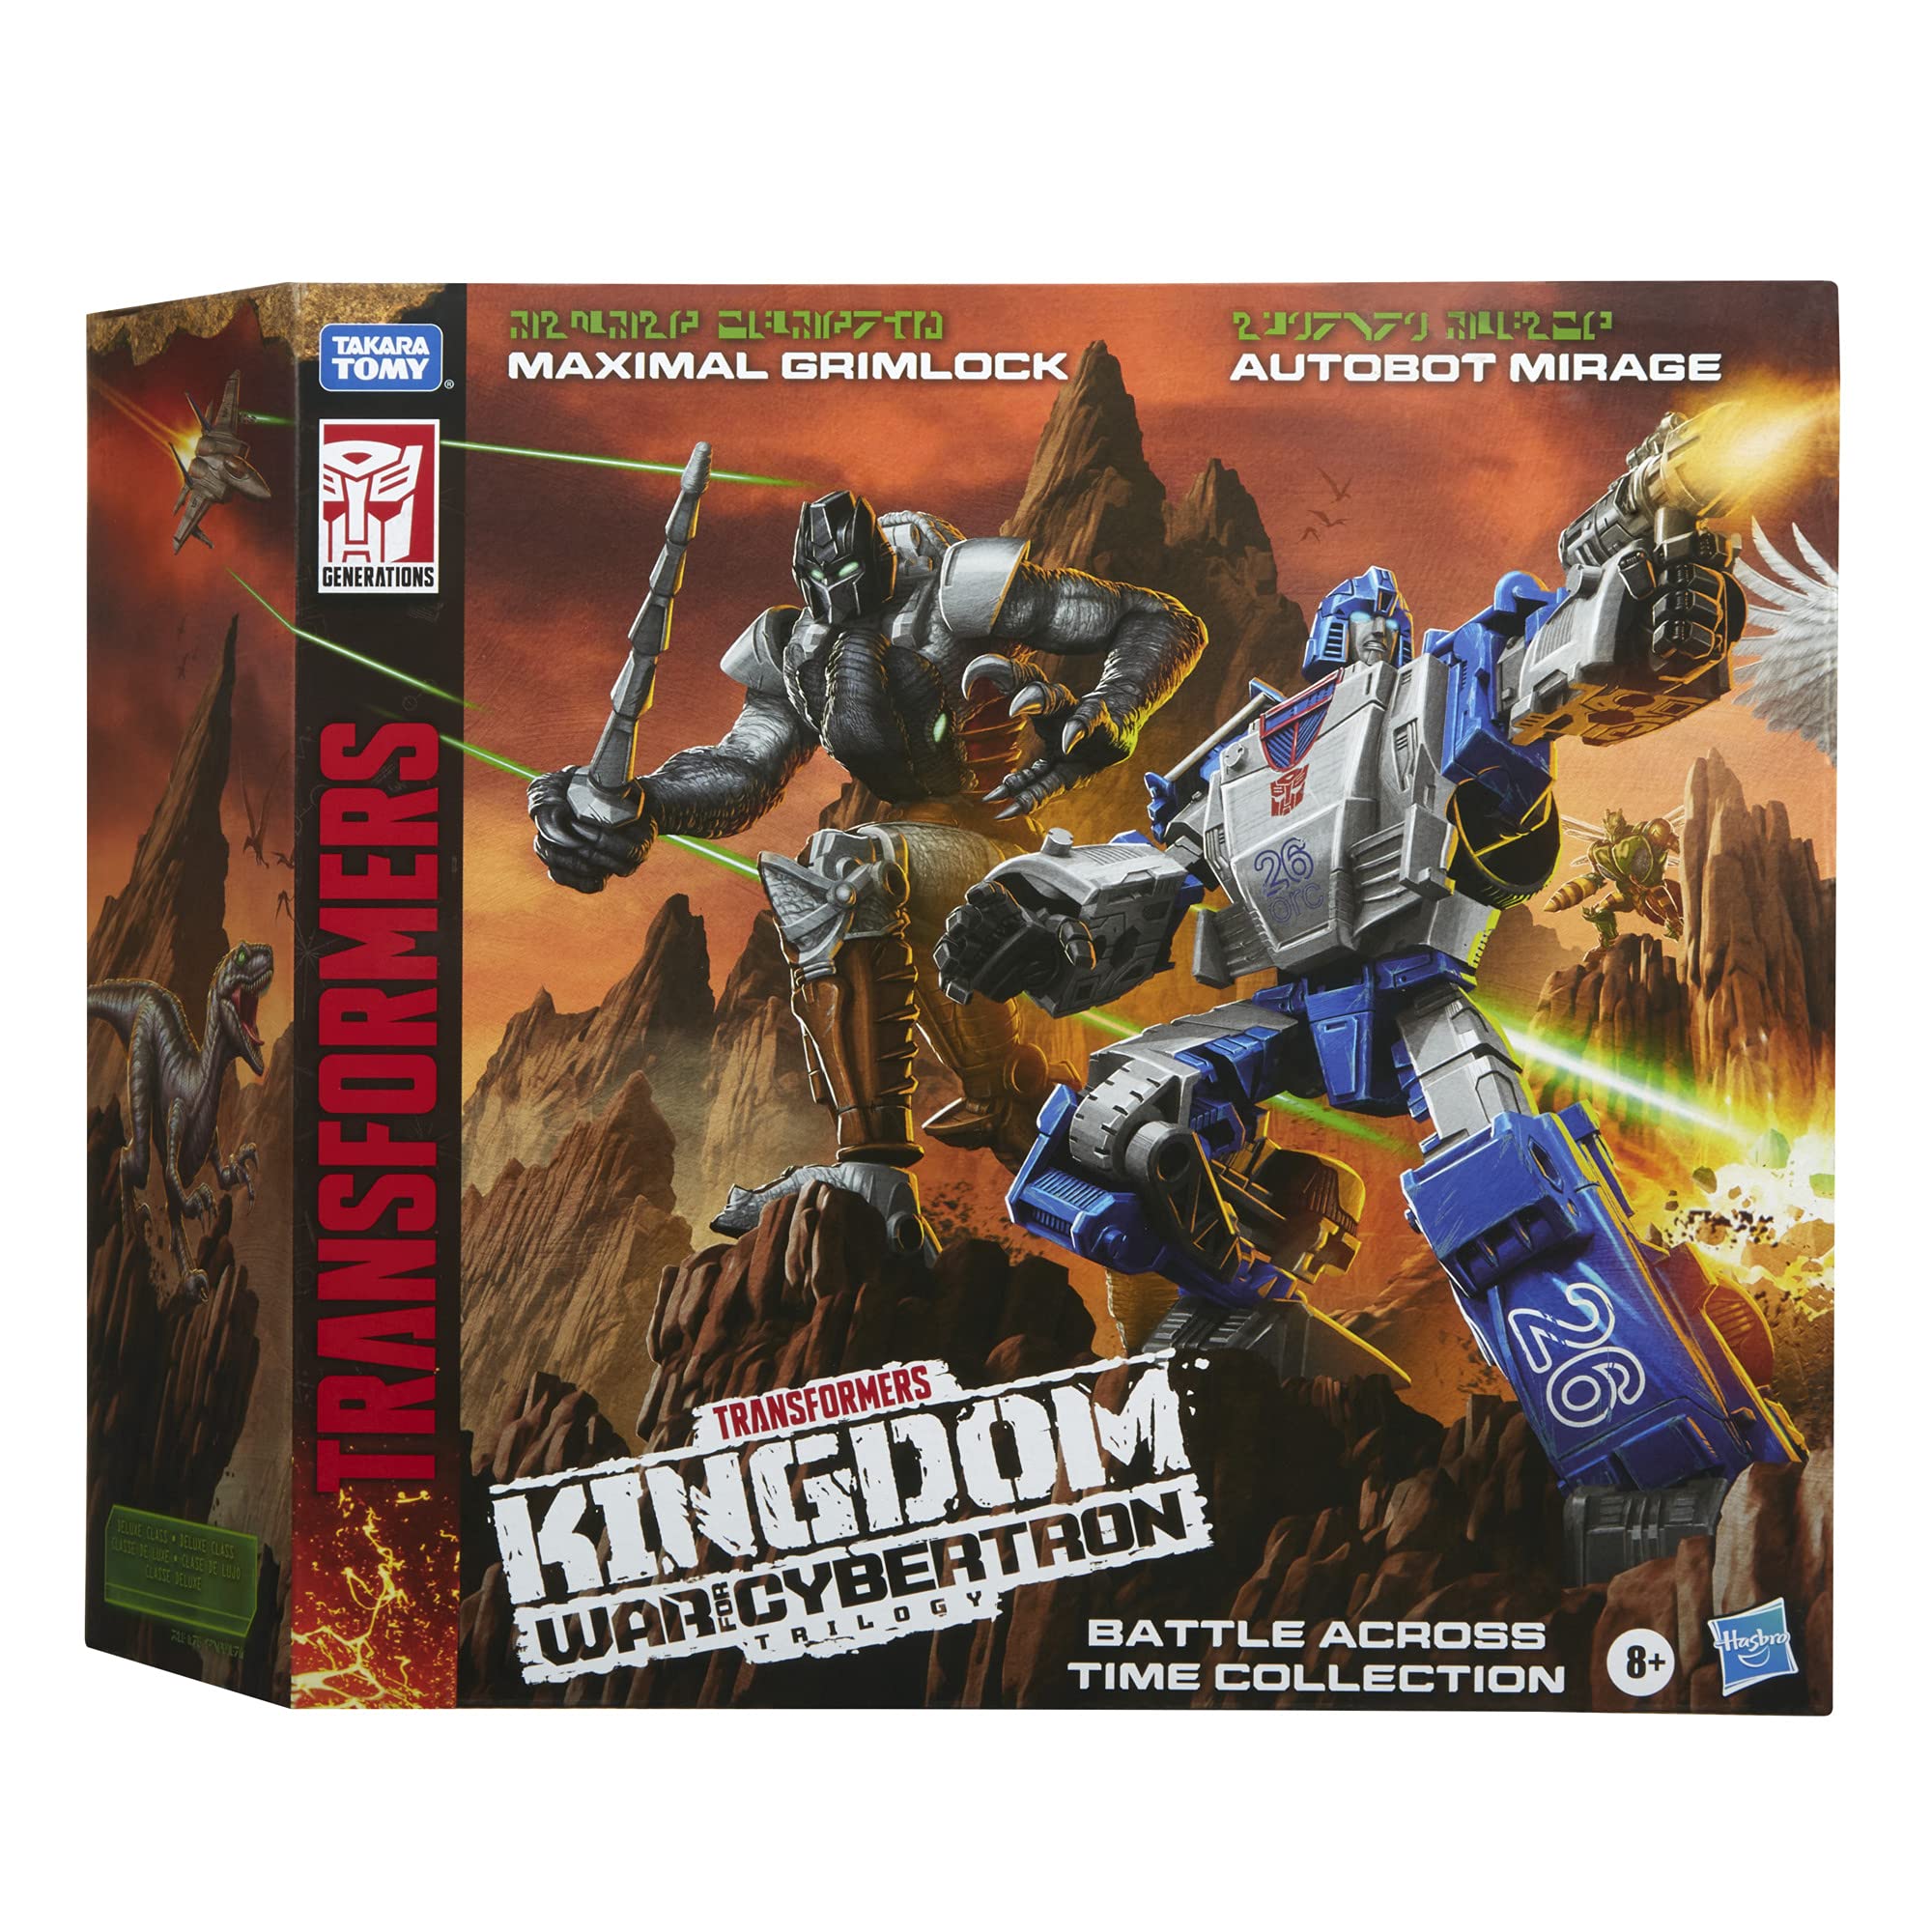 Transformers Toys Generations Kingdom Battle Across Time Collection Deluxe WFC-K40 Autobot Mirage & Maximal Grimlock, Age 8 and Up, 5.5-inch (Amazon Exclusive)